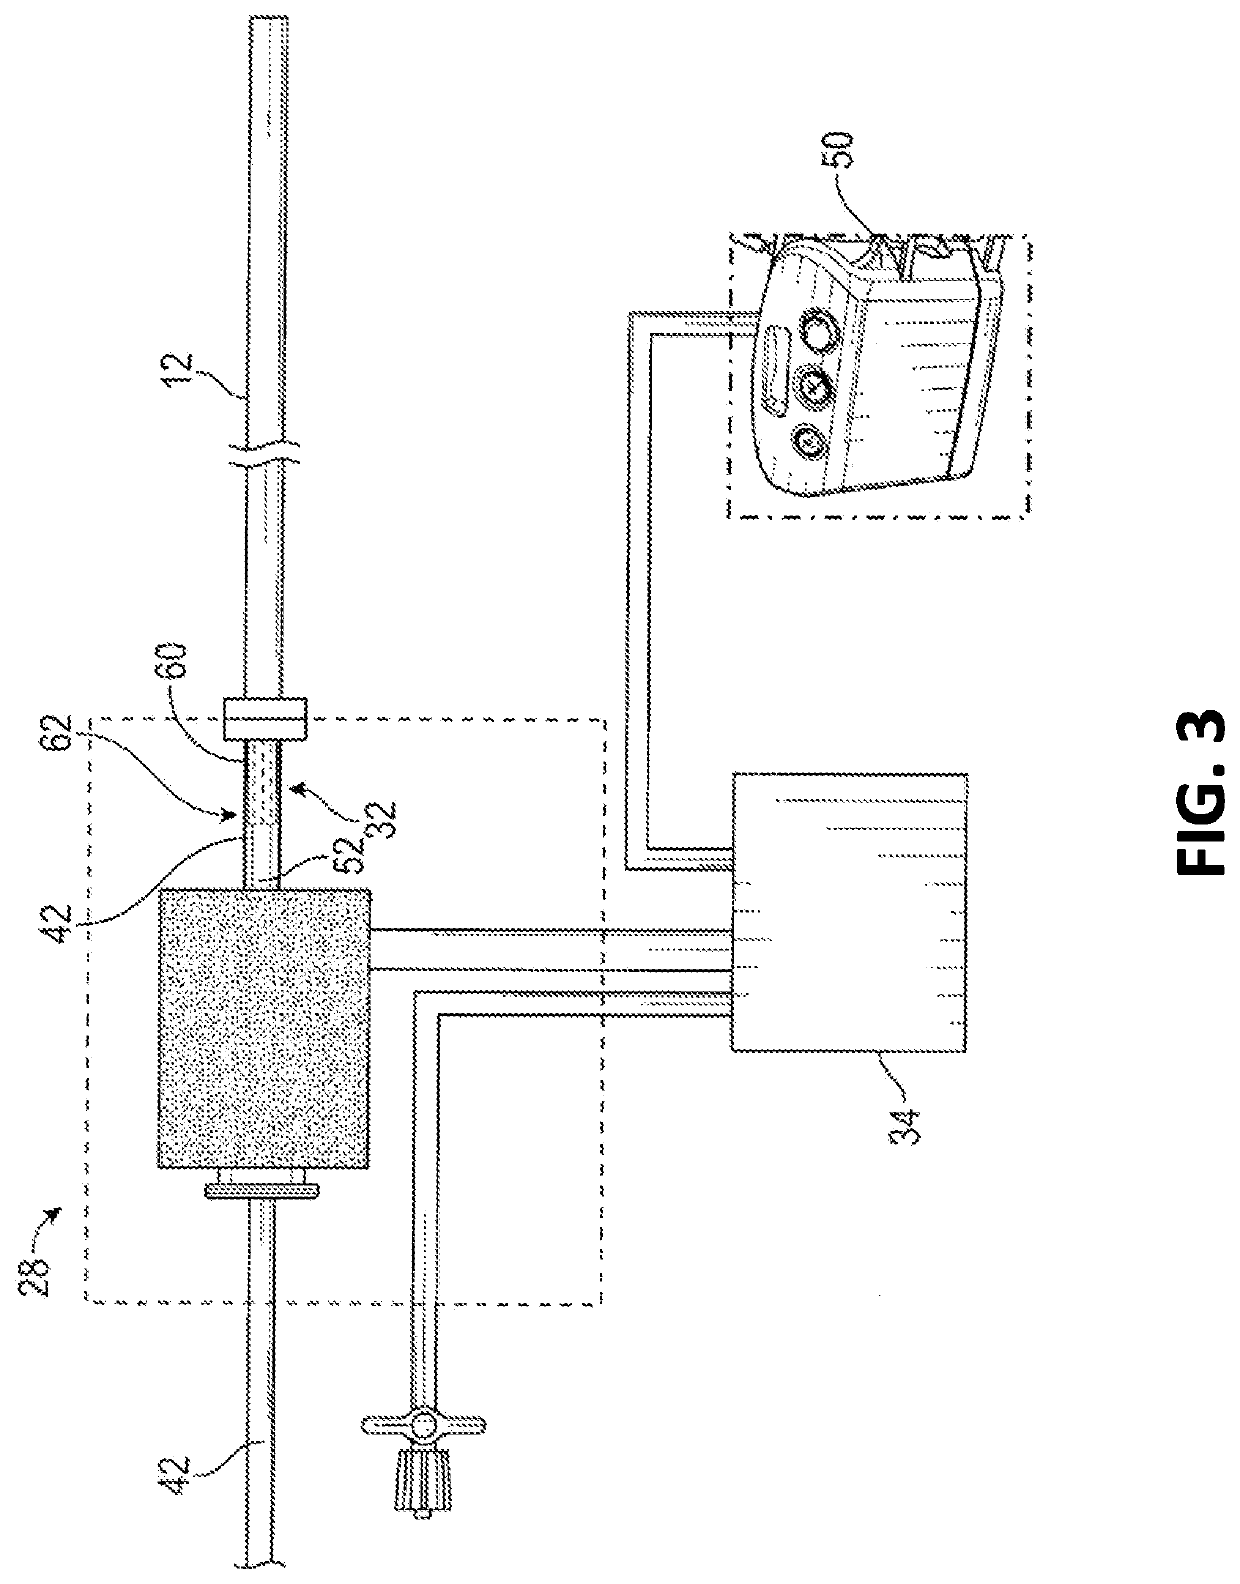 Methods of placing large bore aspiration catheters